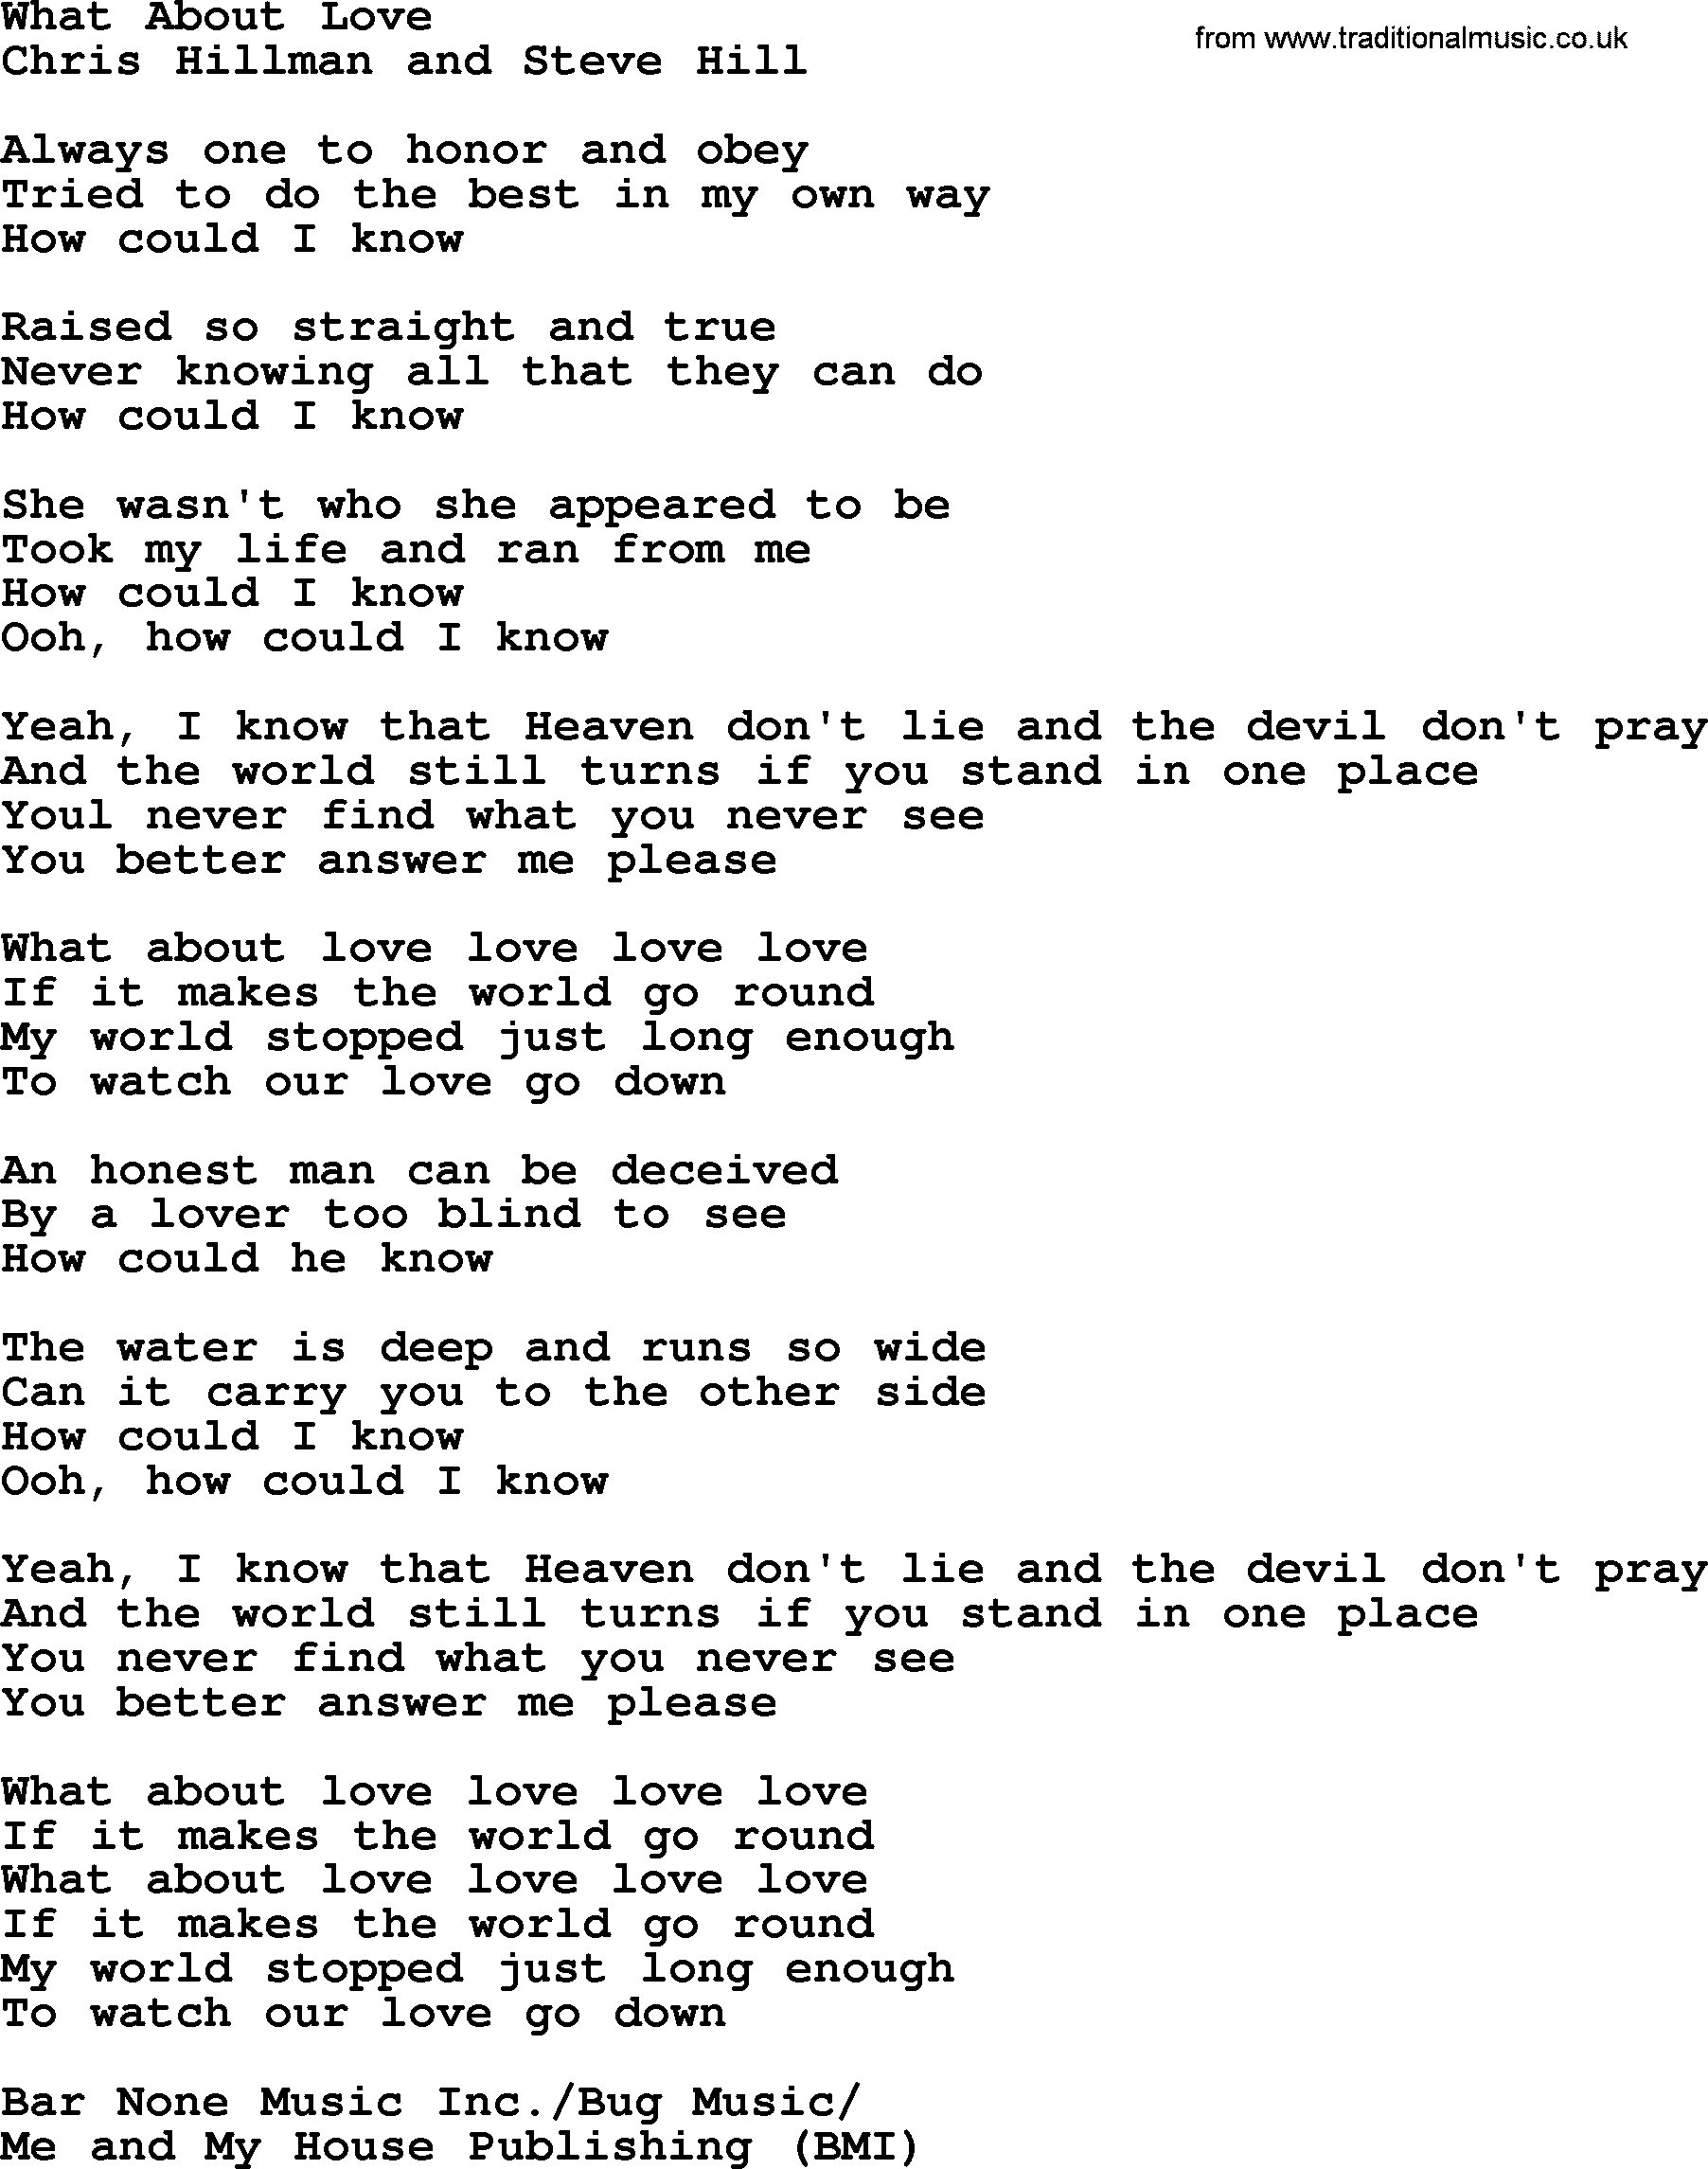 The Byrds song What About Love, lyrics